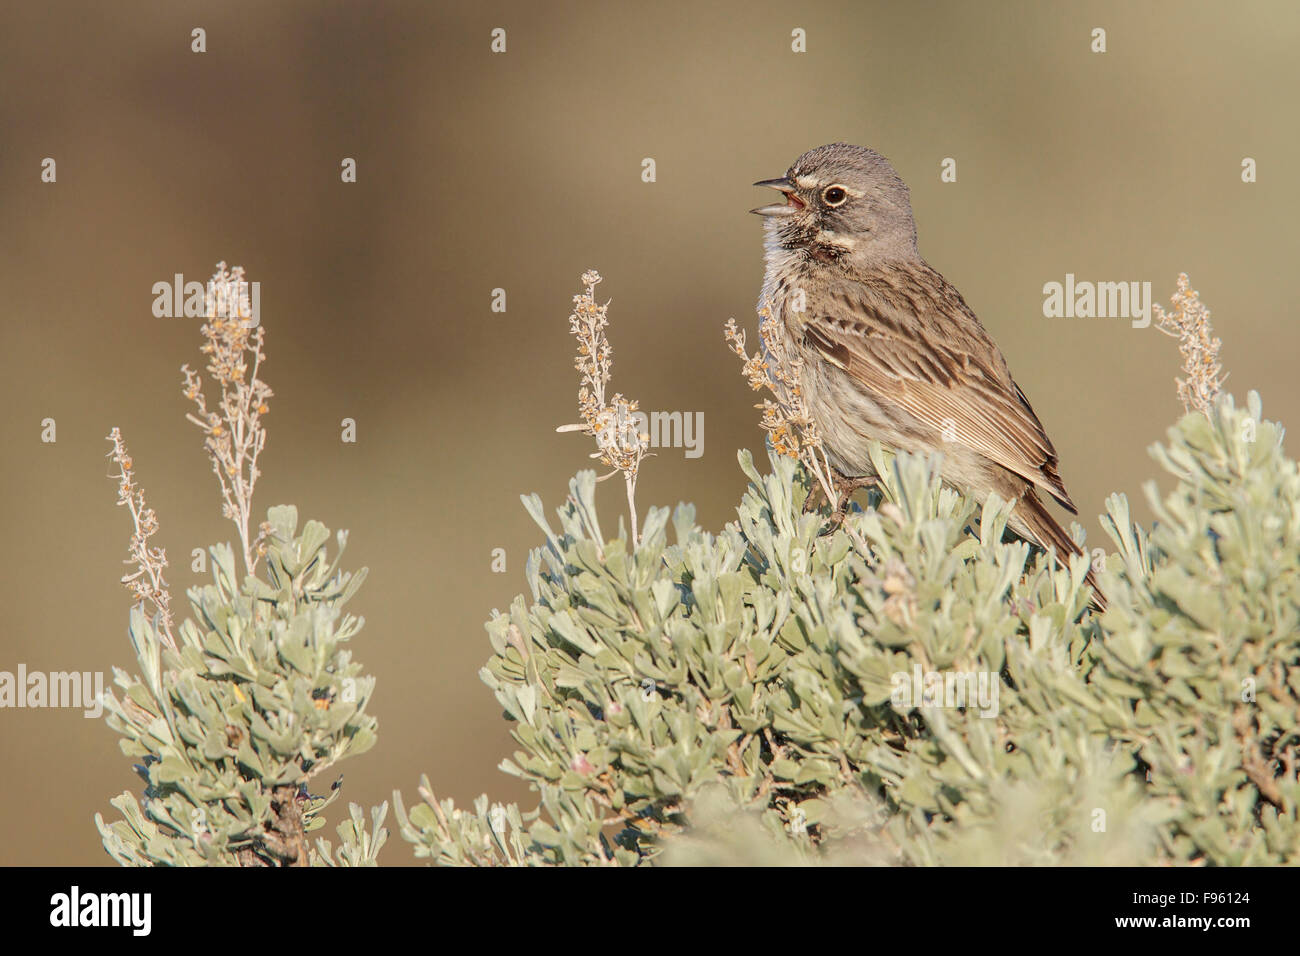 Sagebrush Sparrow (Artemisiospiza nevadensis) perched on a branch in central Washington State, USA. Stock Photo